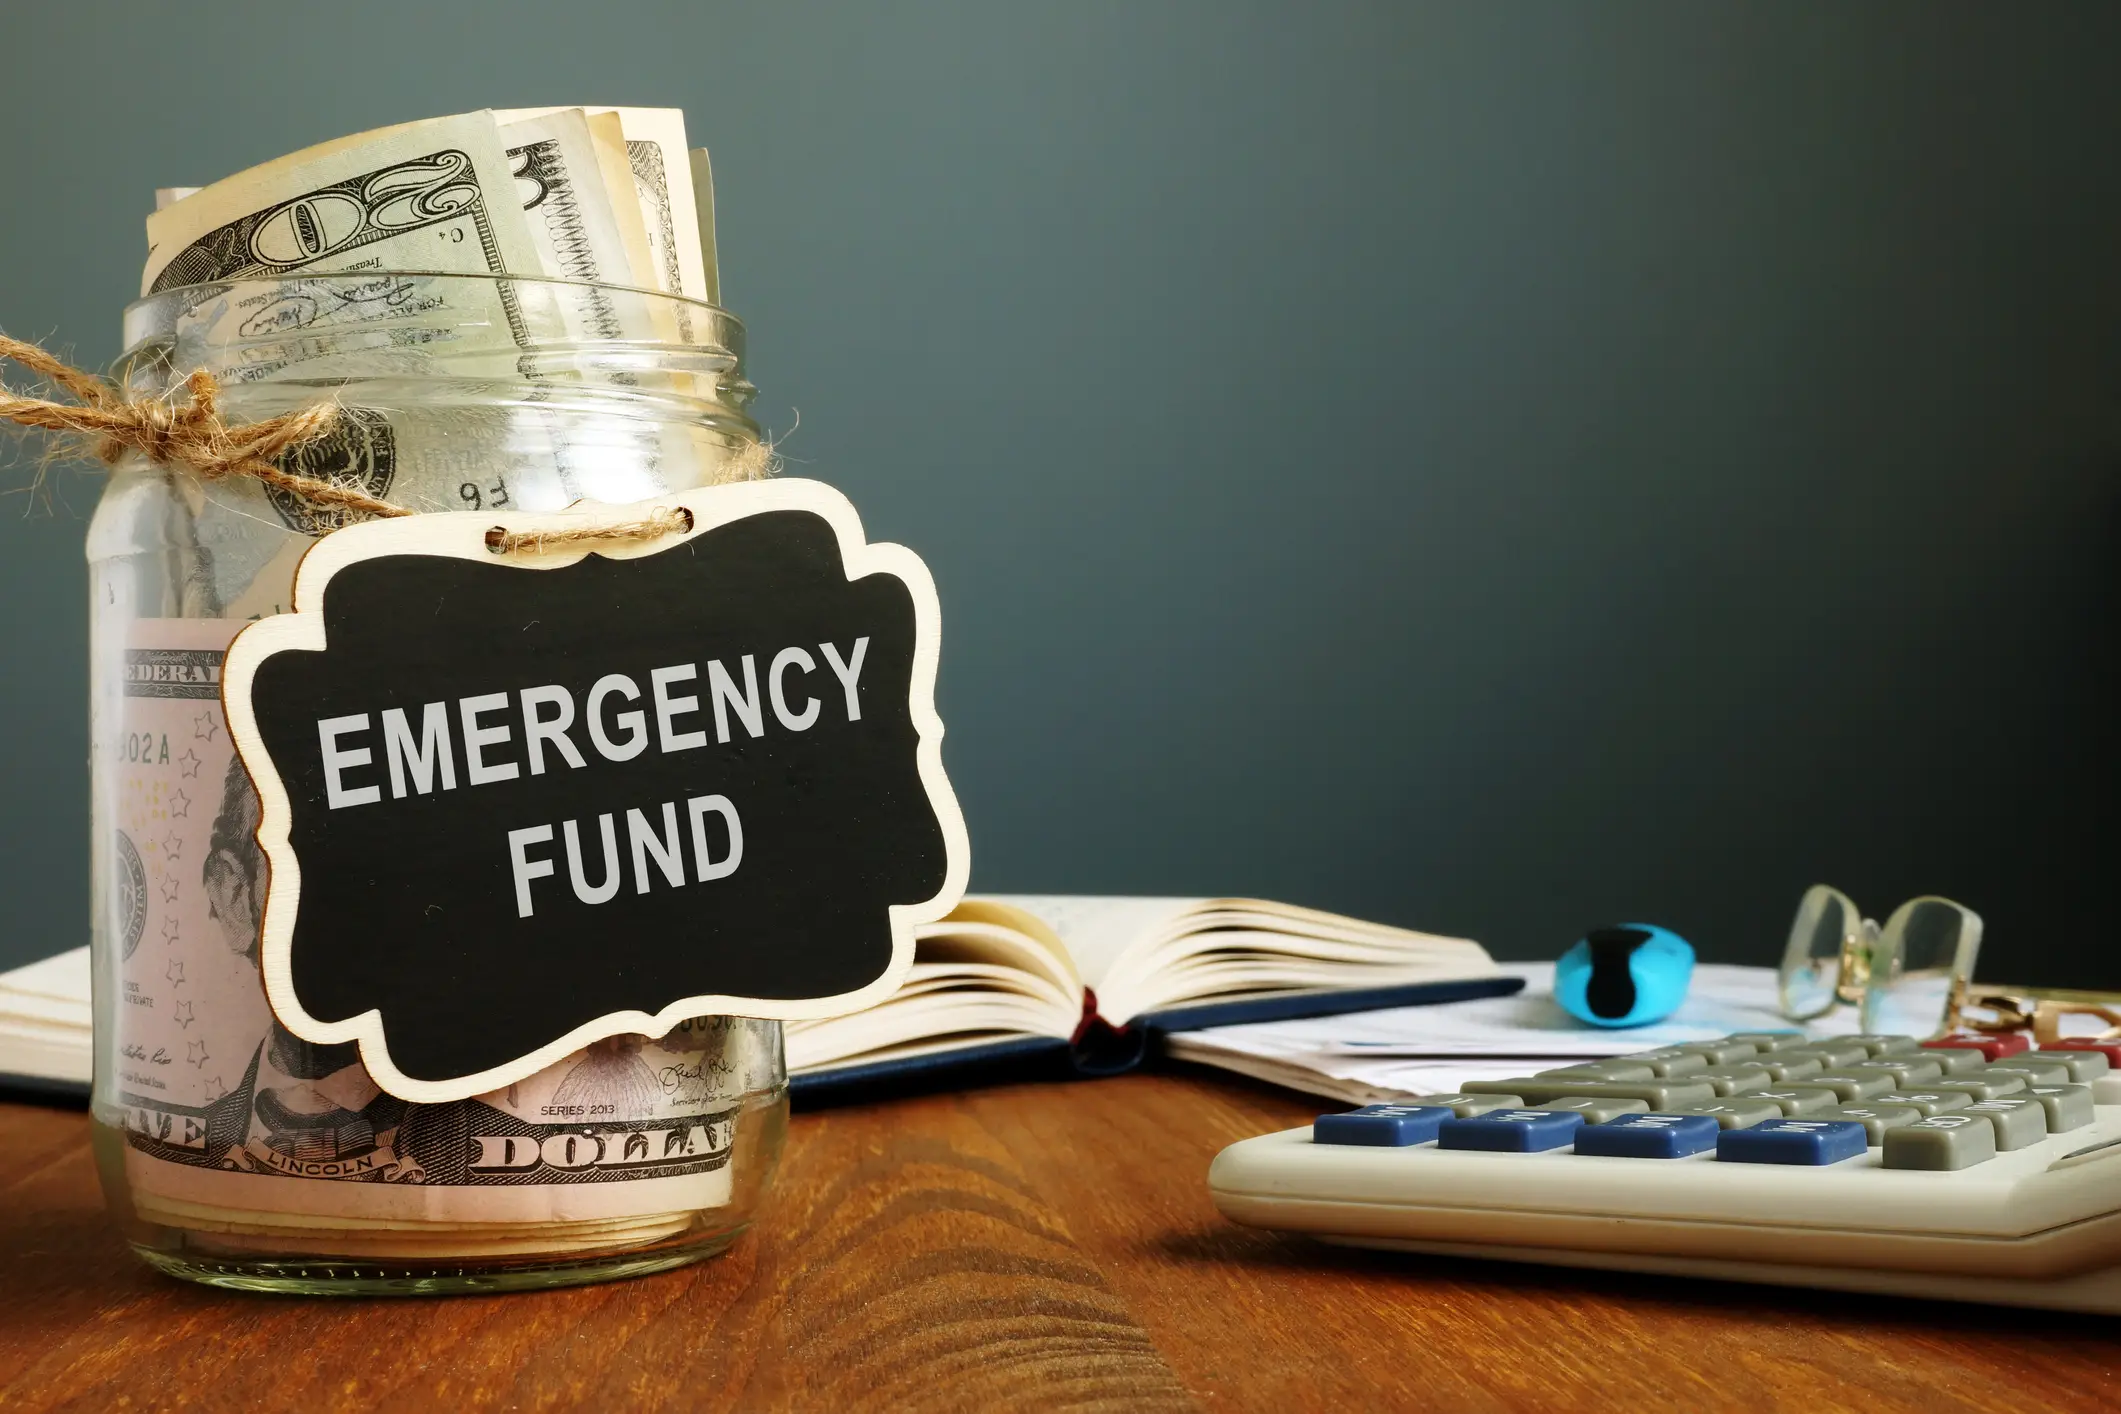 How_to_Build_an_Emergency_Fund_for_a_New_Home_-_Thumbnail.webp